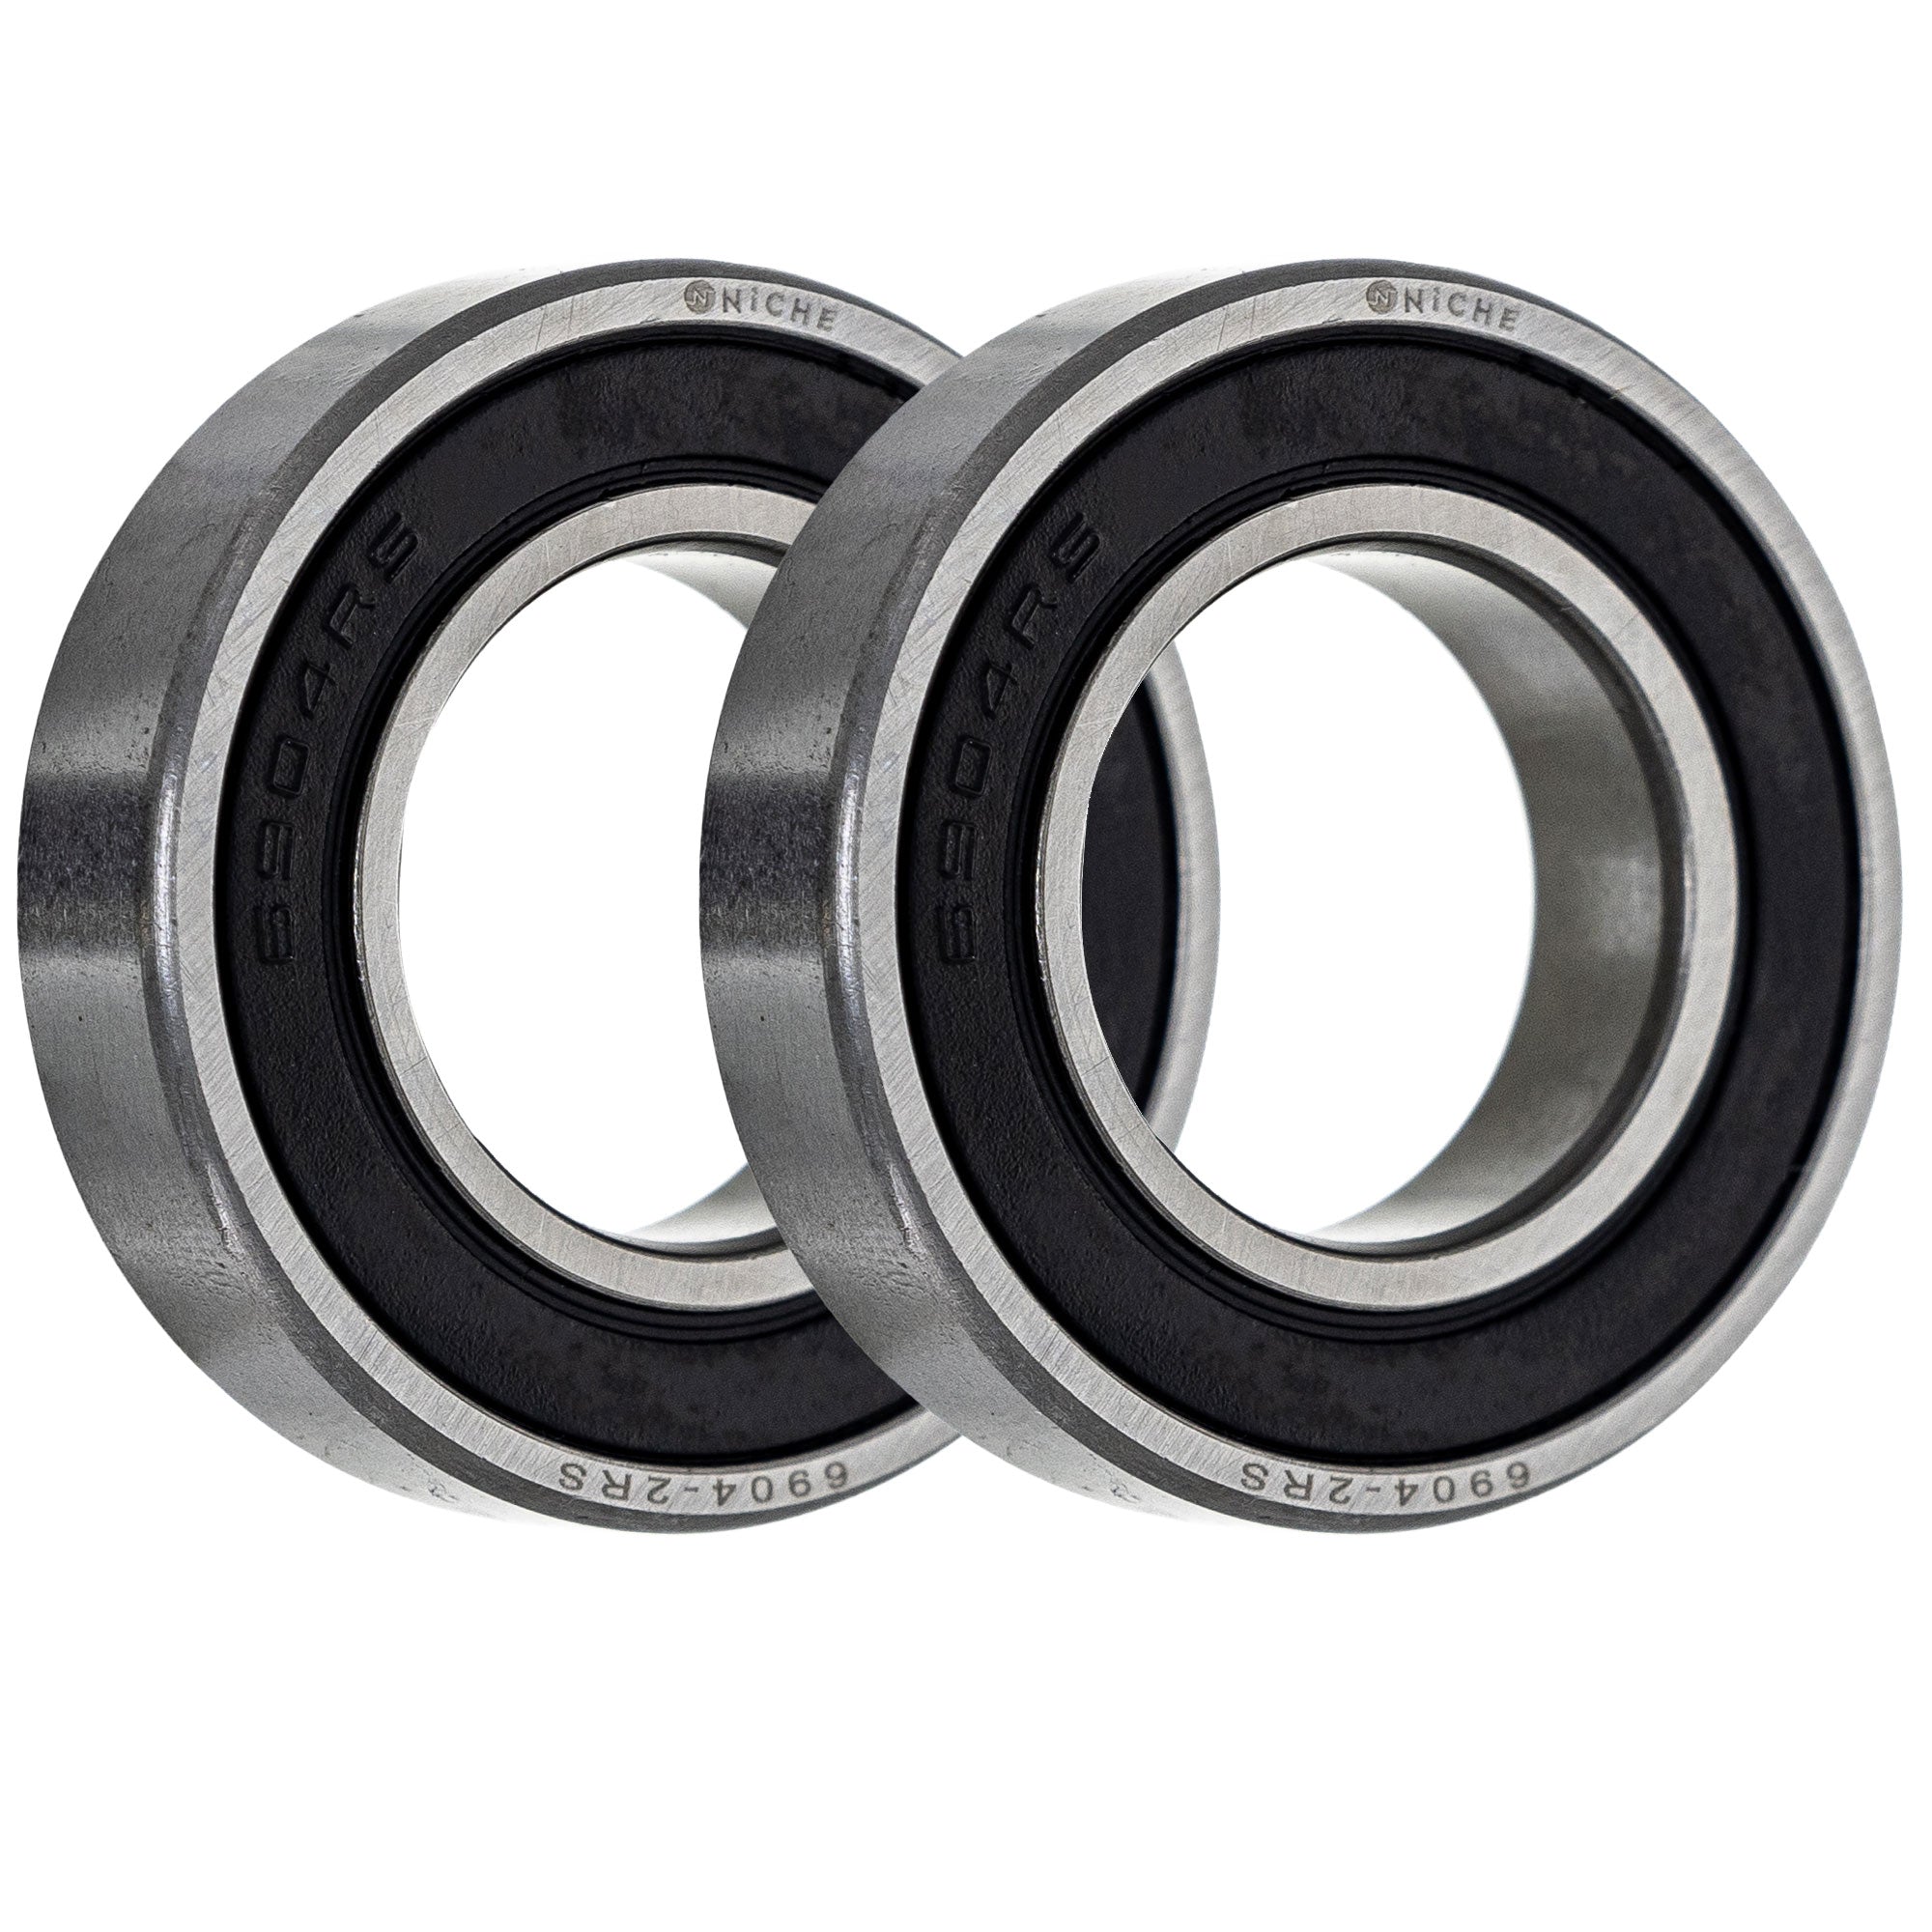 Single Row, Deep Groove, Ball Bearing Pack of 2 2-Pack for zOTHER YZ450F YZ426F YZ400F NICHE 519-CBB2258R